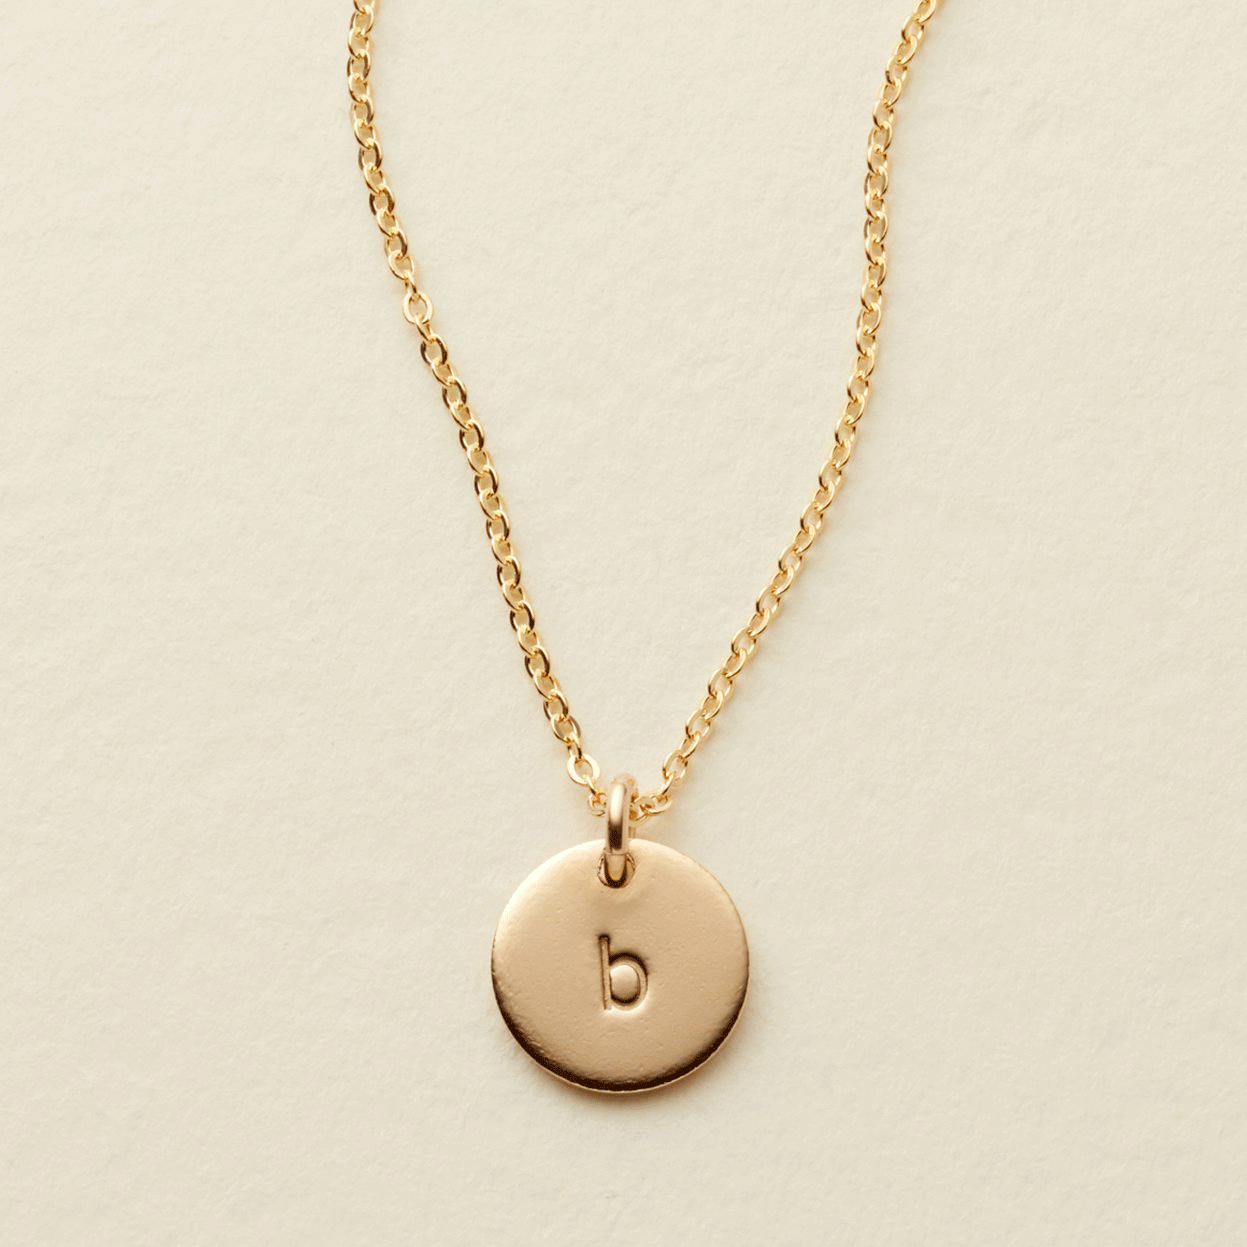 Initial Disk Necklace - 3/8"